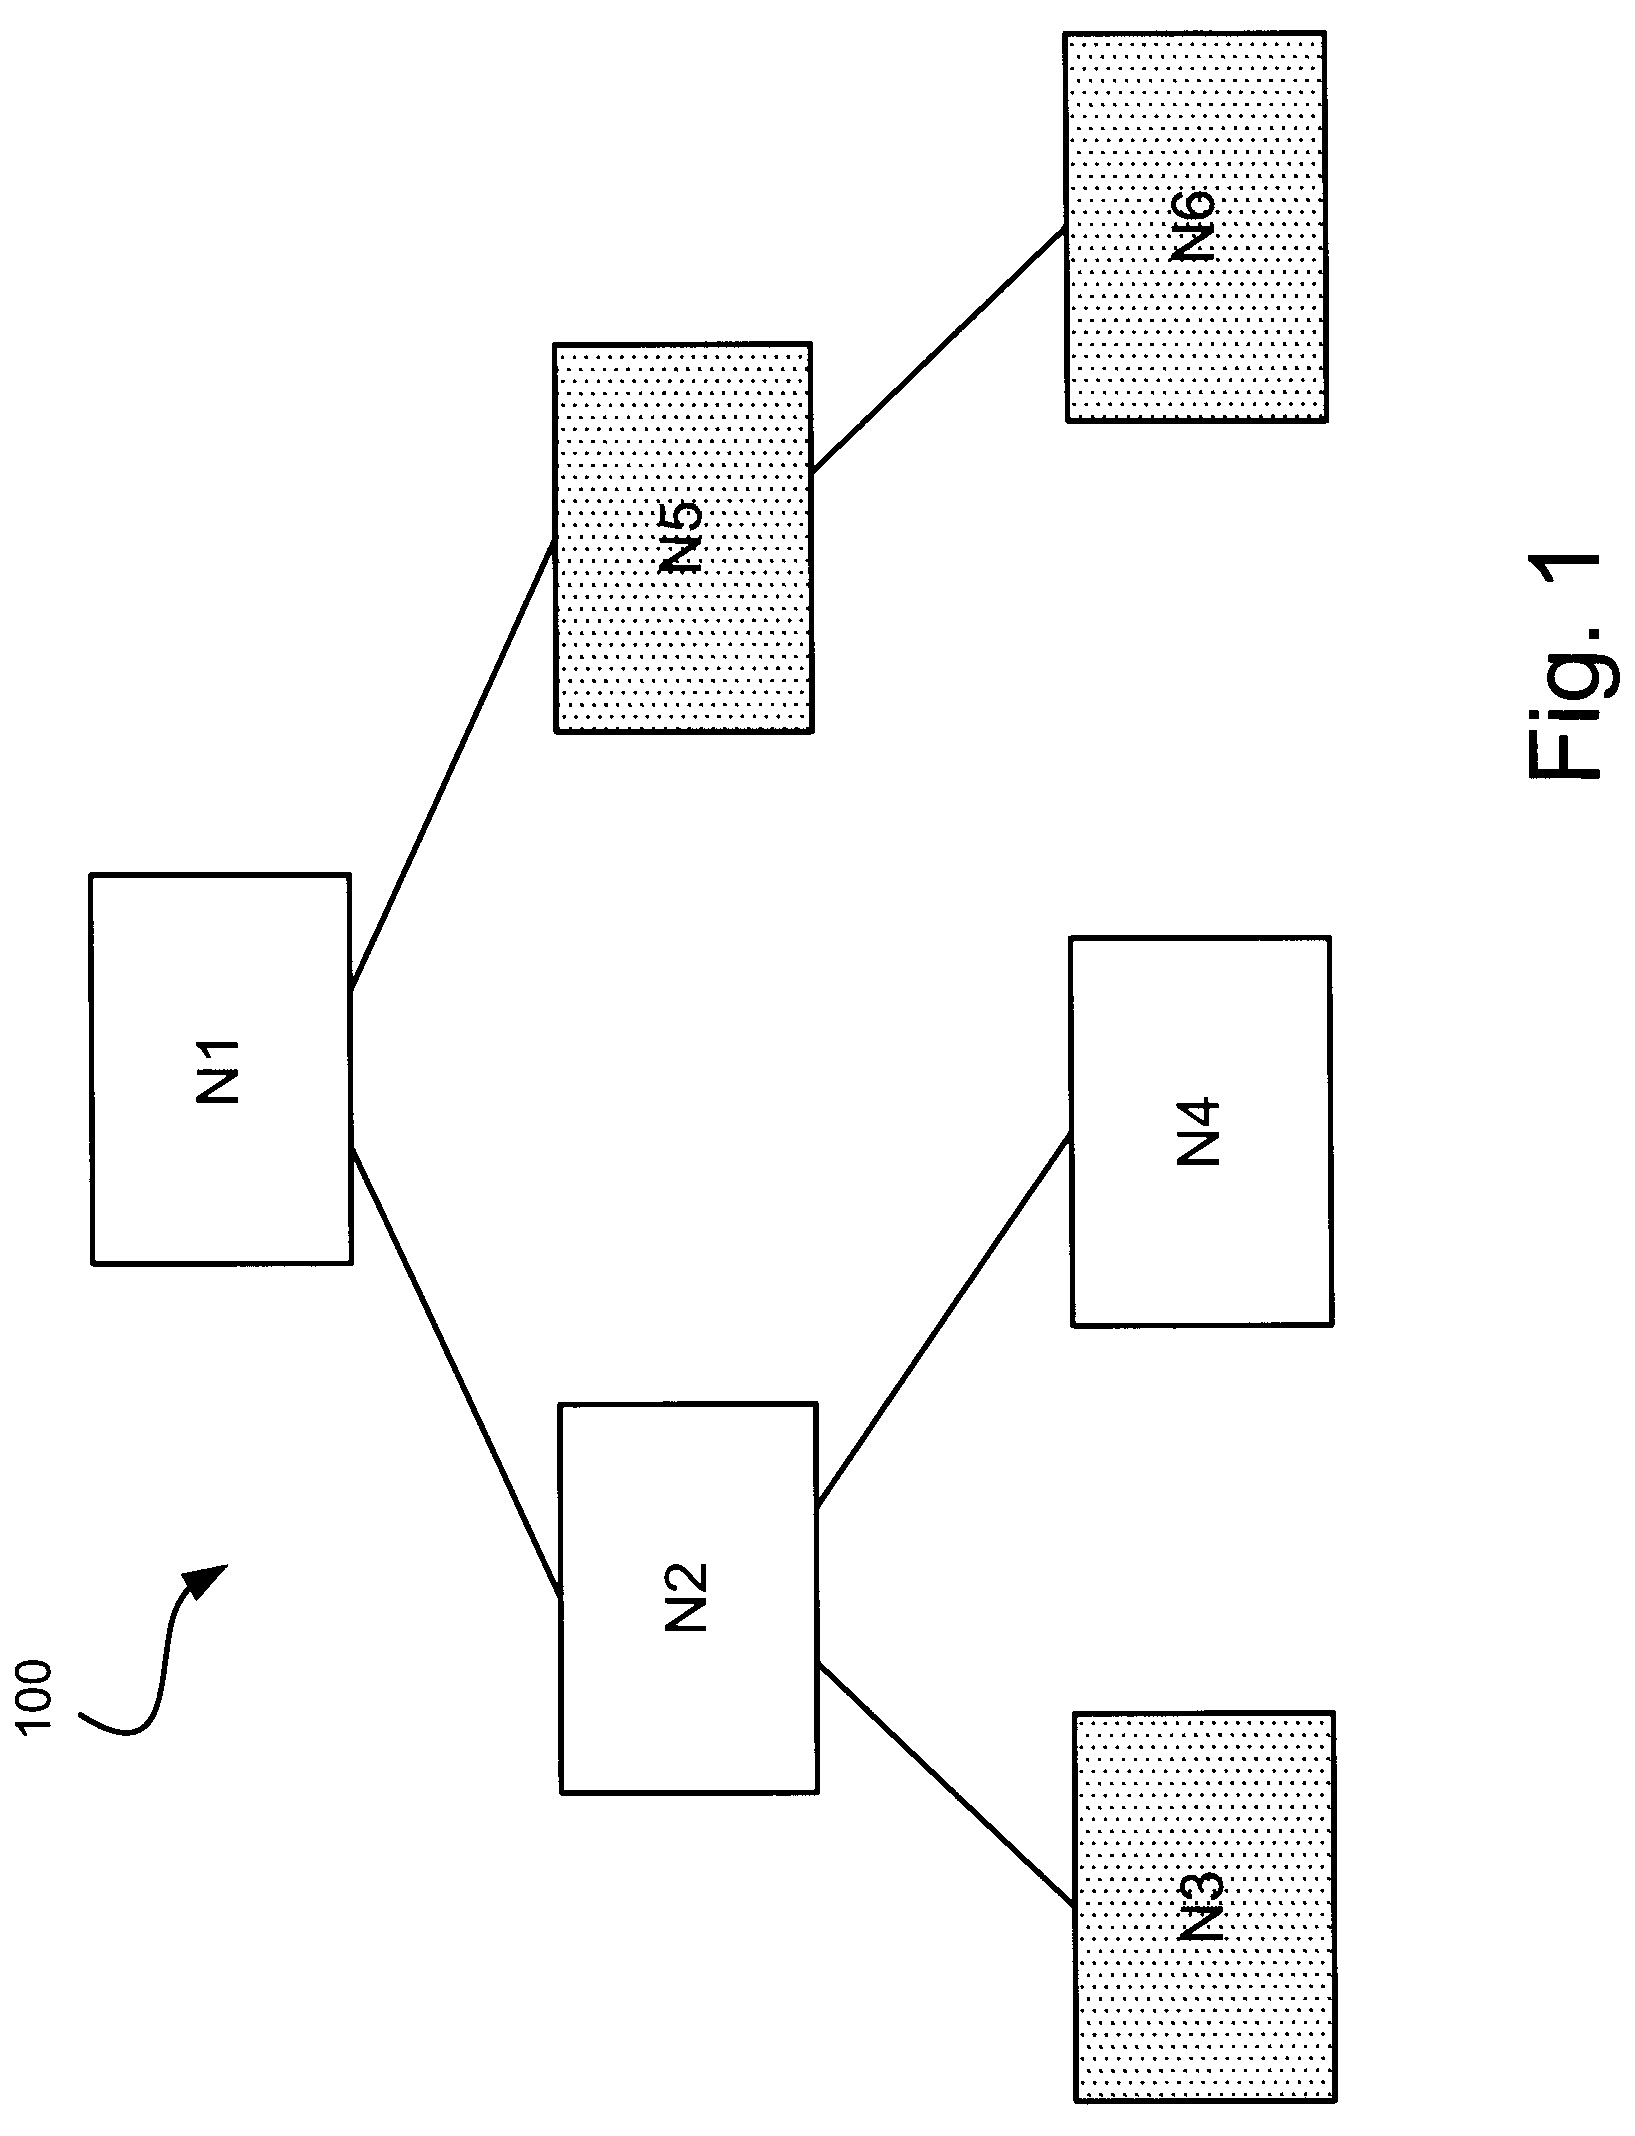 Method and system for compressing route entries in a route table based on equal-cost multi-paths (ECMPs) matches